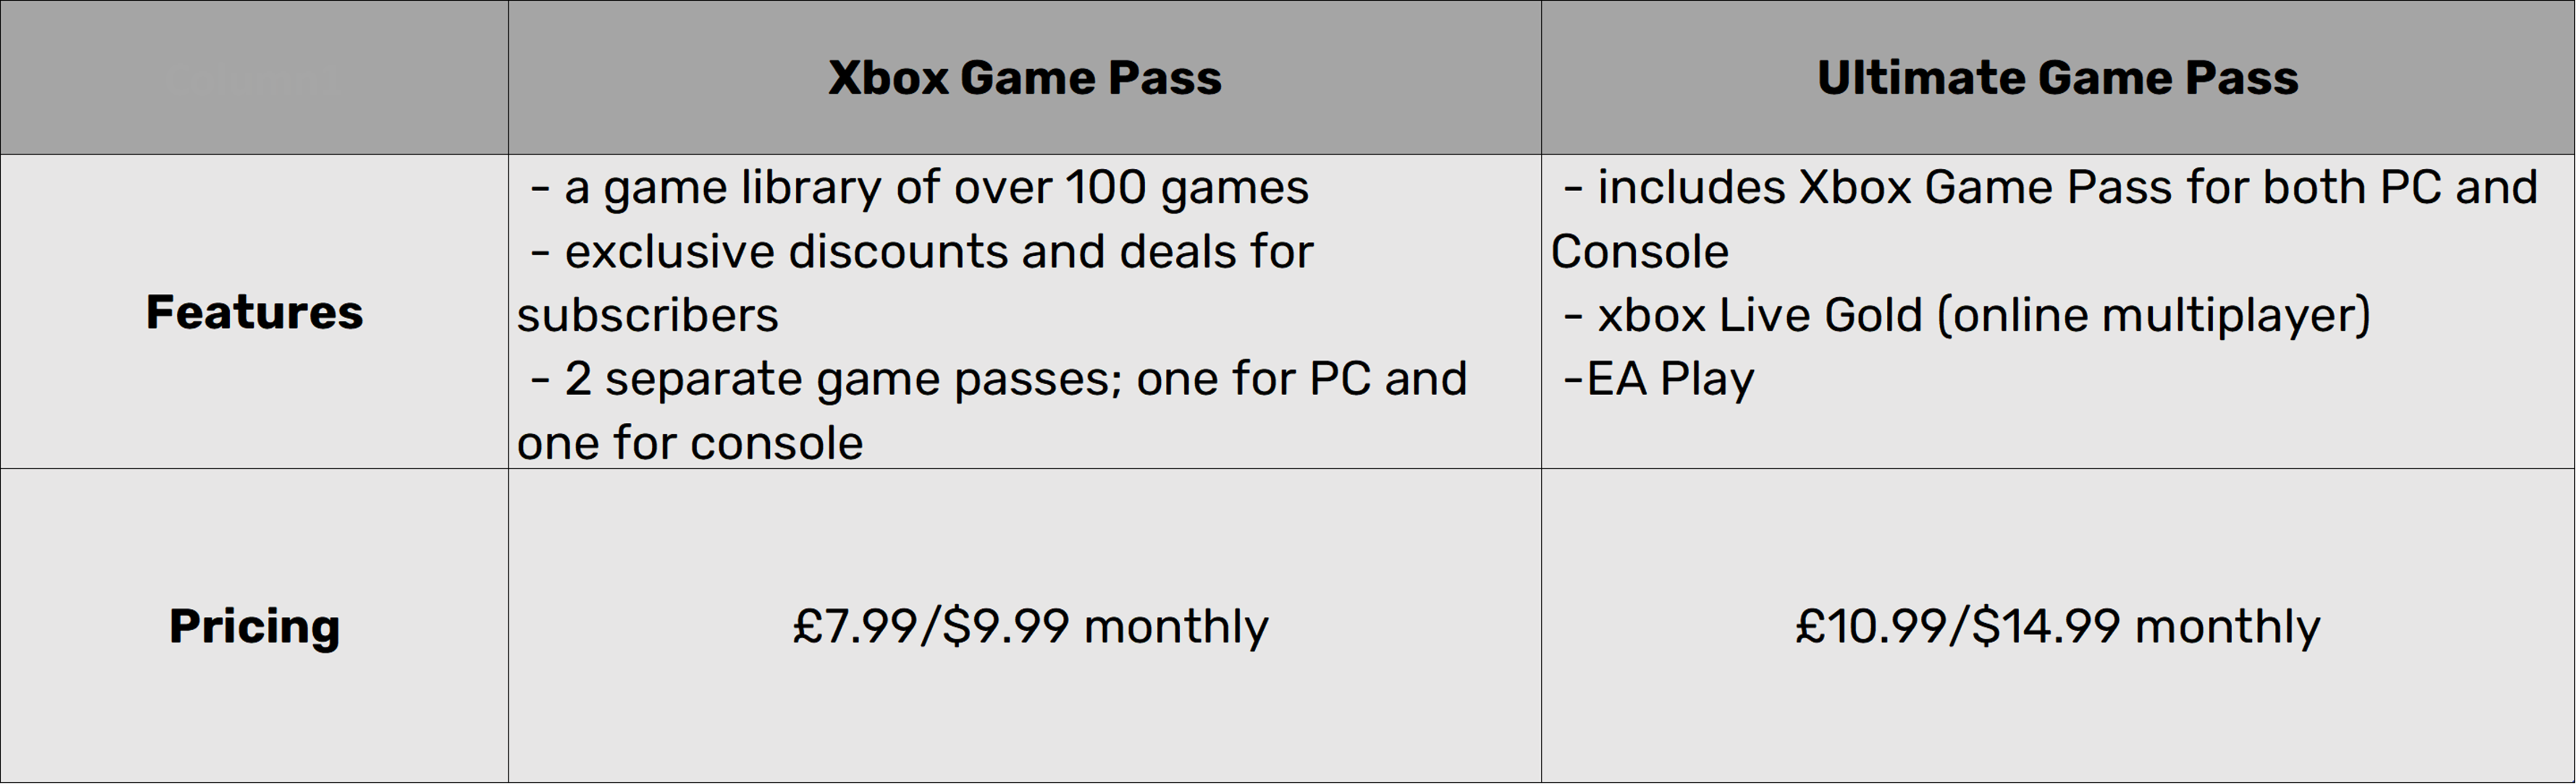 PlayStation Plus Vs. Xbox Game Pass: Comparing Prices, Features, And Games  - GameSpot